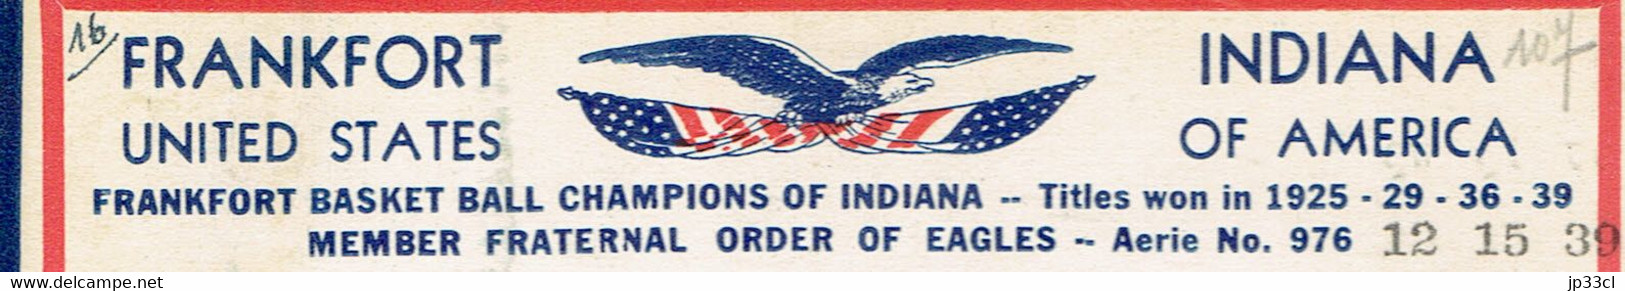 Basket Ball : Vintage Card From Frankfort (Champions Of Indiana 1925 - 29 - 36 - 39) - Baloncesto